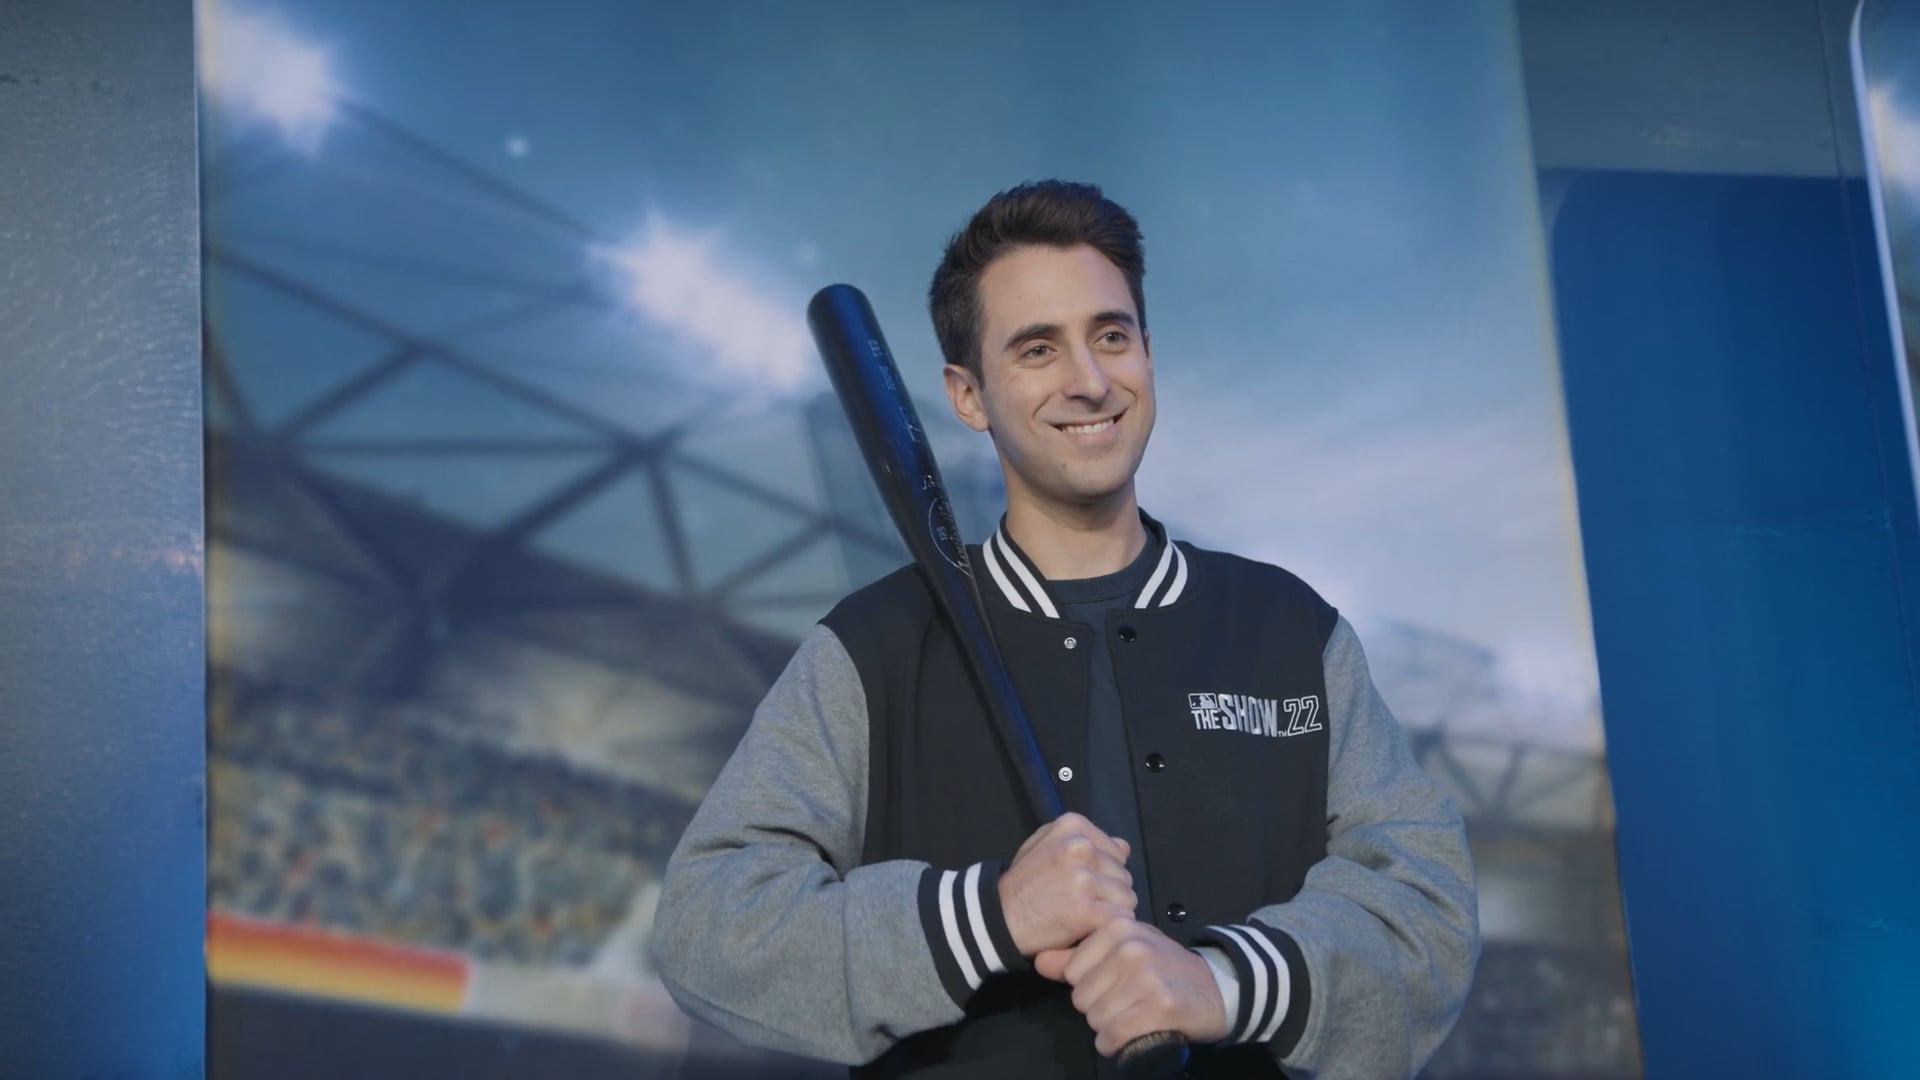 Host Jeff Eisenband holds baseball as he poses for a photo in front of a Dodger's Stadium backdrop